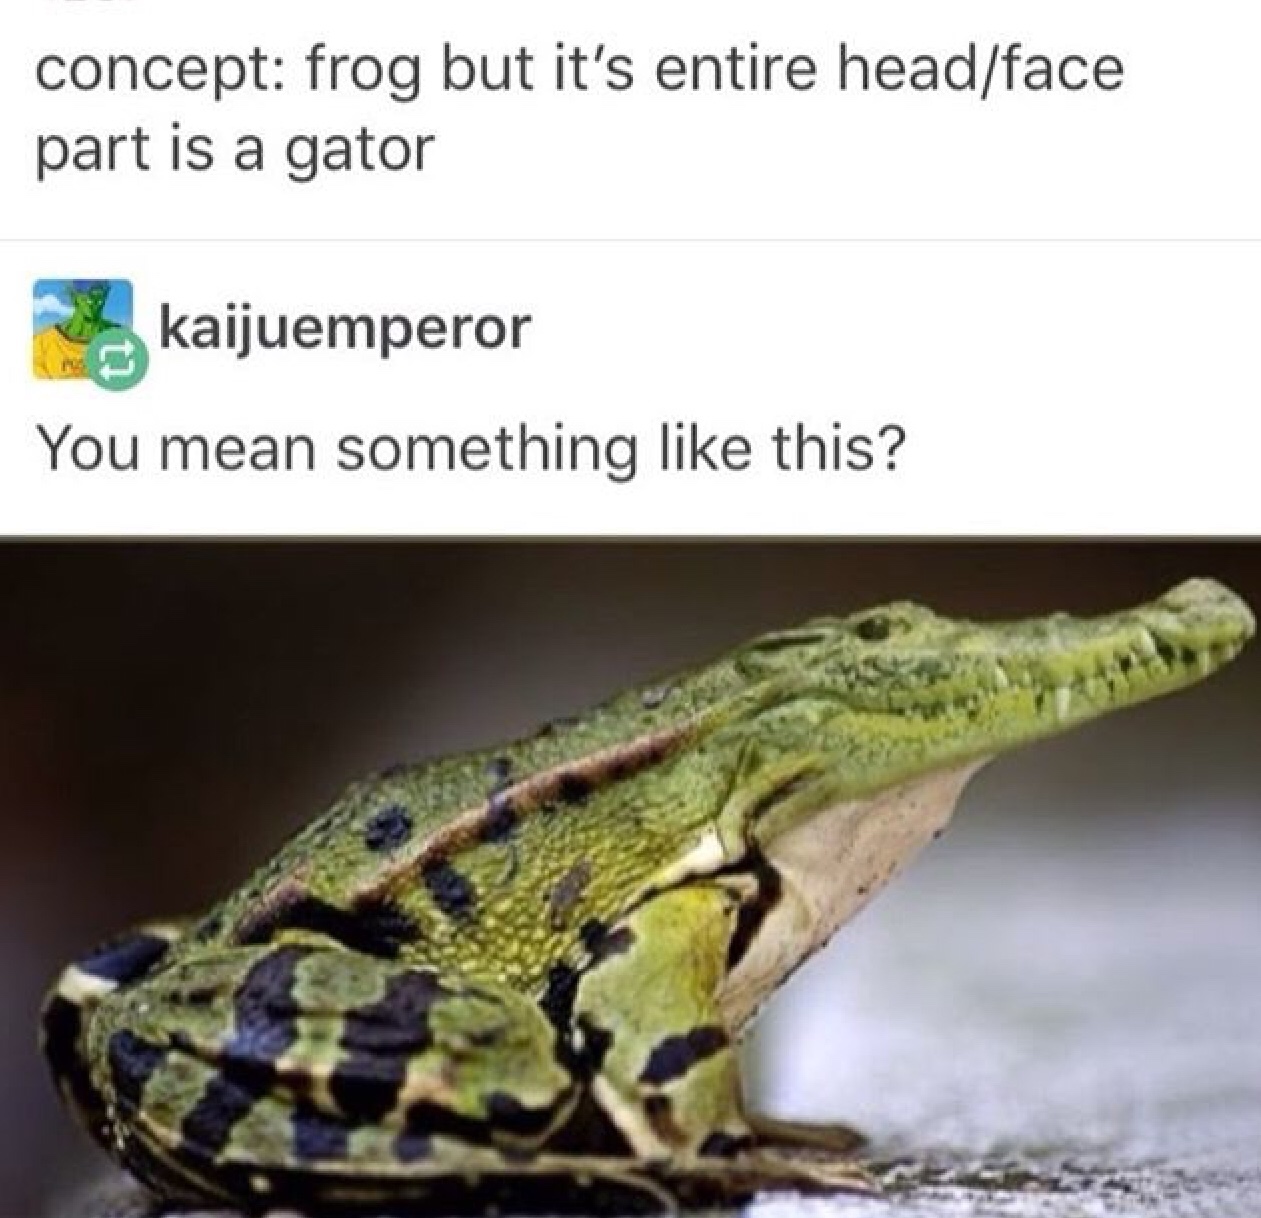 memes - funny animal mashups - concept frog but it's entire headface part is a gator kaijuemperor You mean something this?